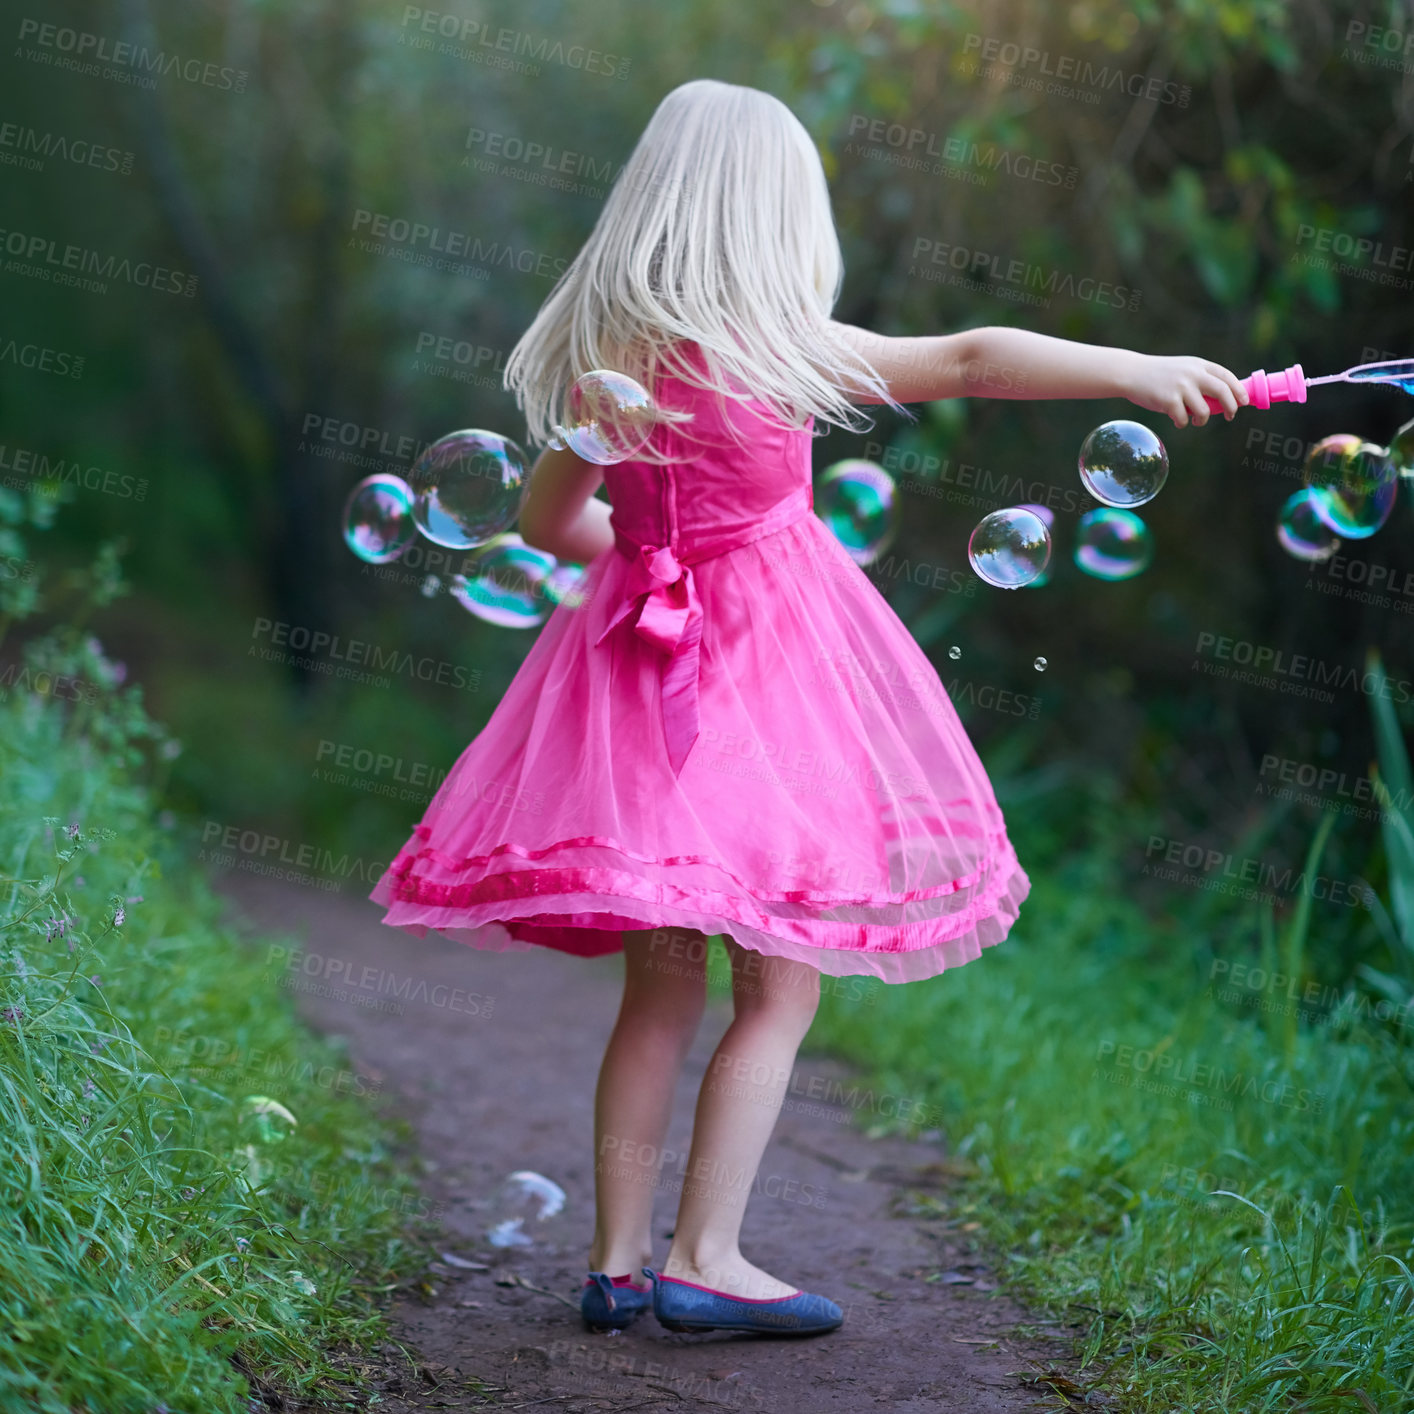 Buy stock photo Shot of a cute little girl playing outside